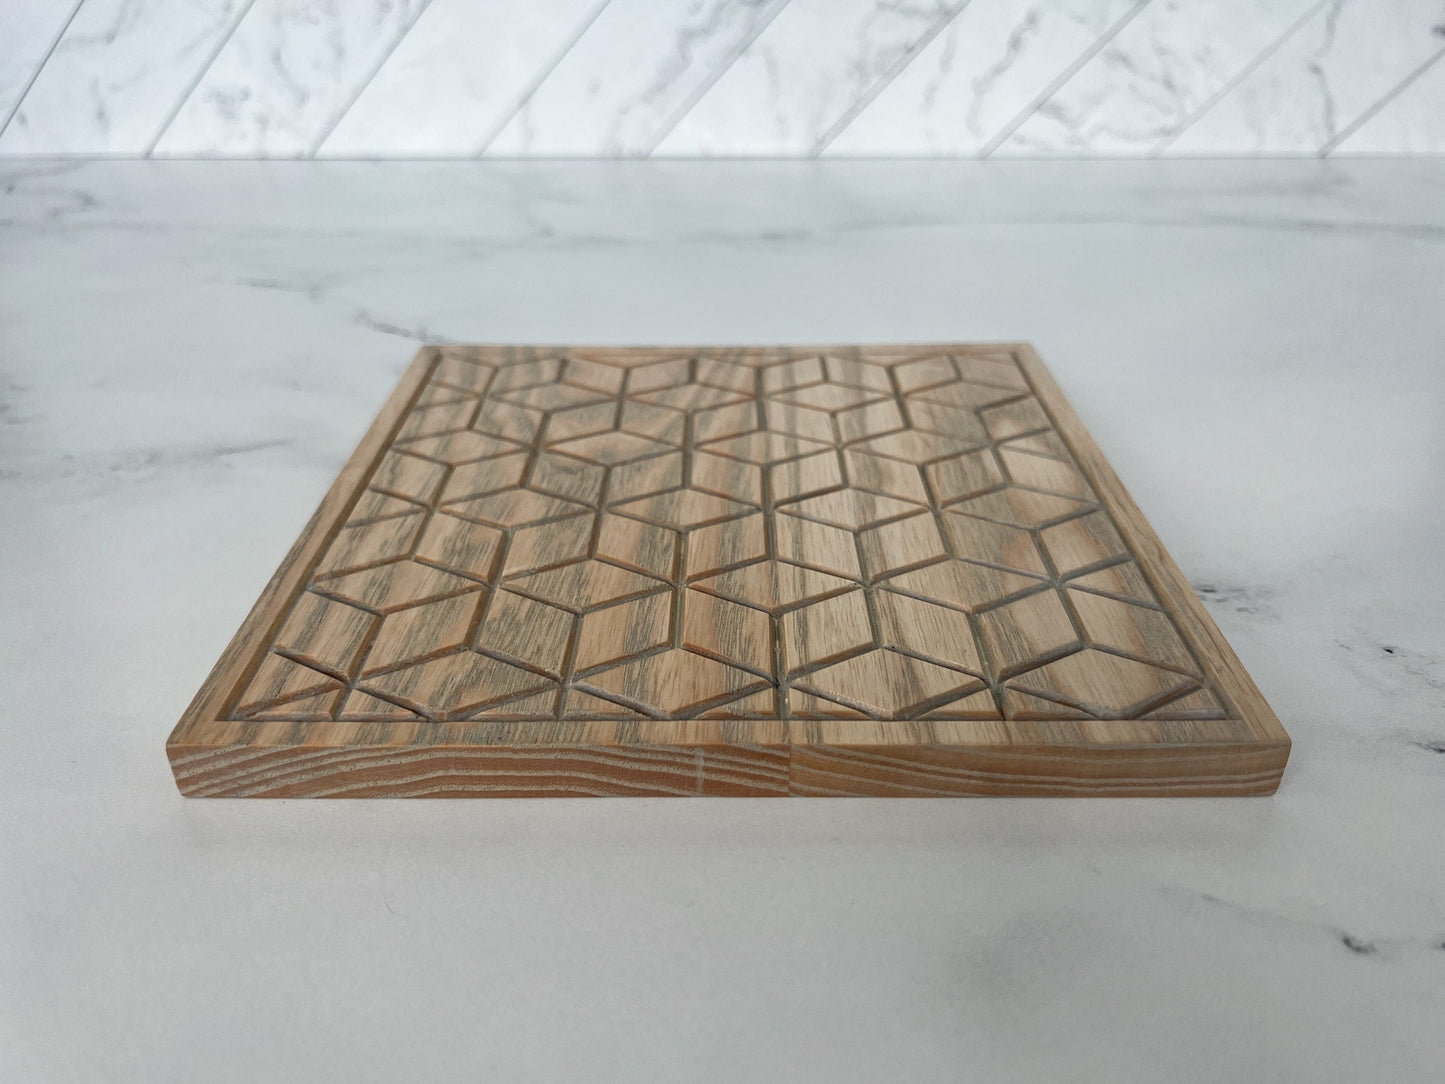 Square Trivet with Geometric Pattern, Serving Tray, Wood Trivet for Dining Table, Dining Accessories, Wood Gifts, Hot Tray, Pot Holder